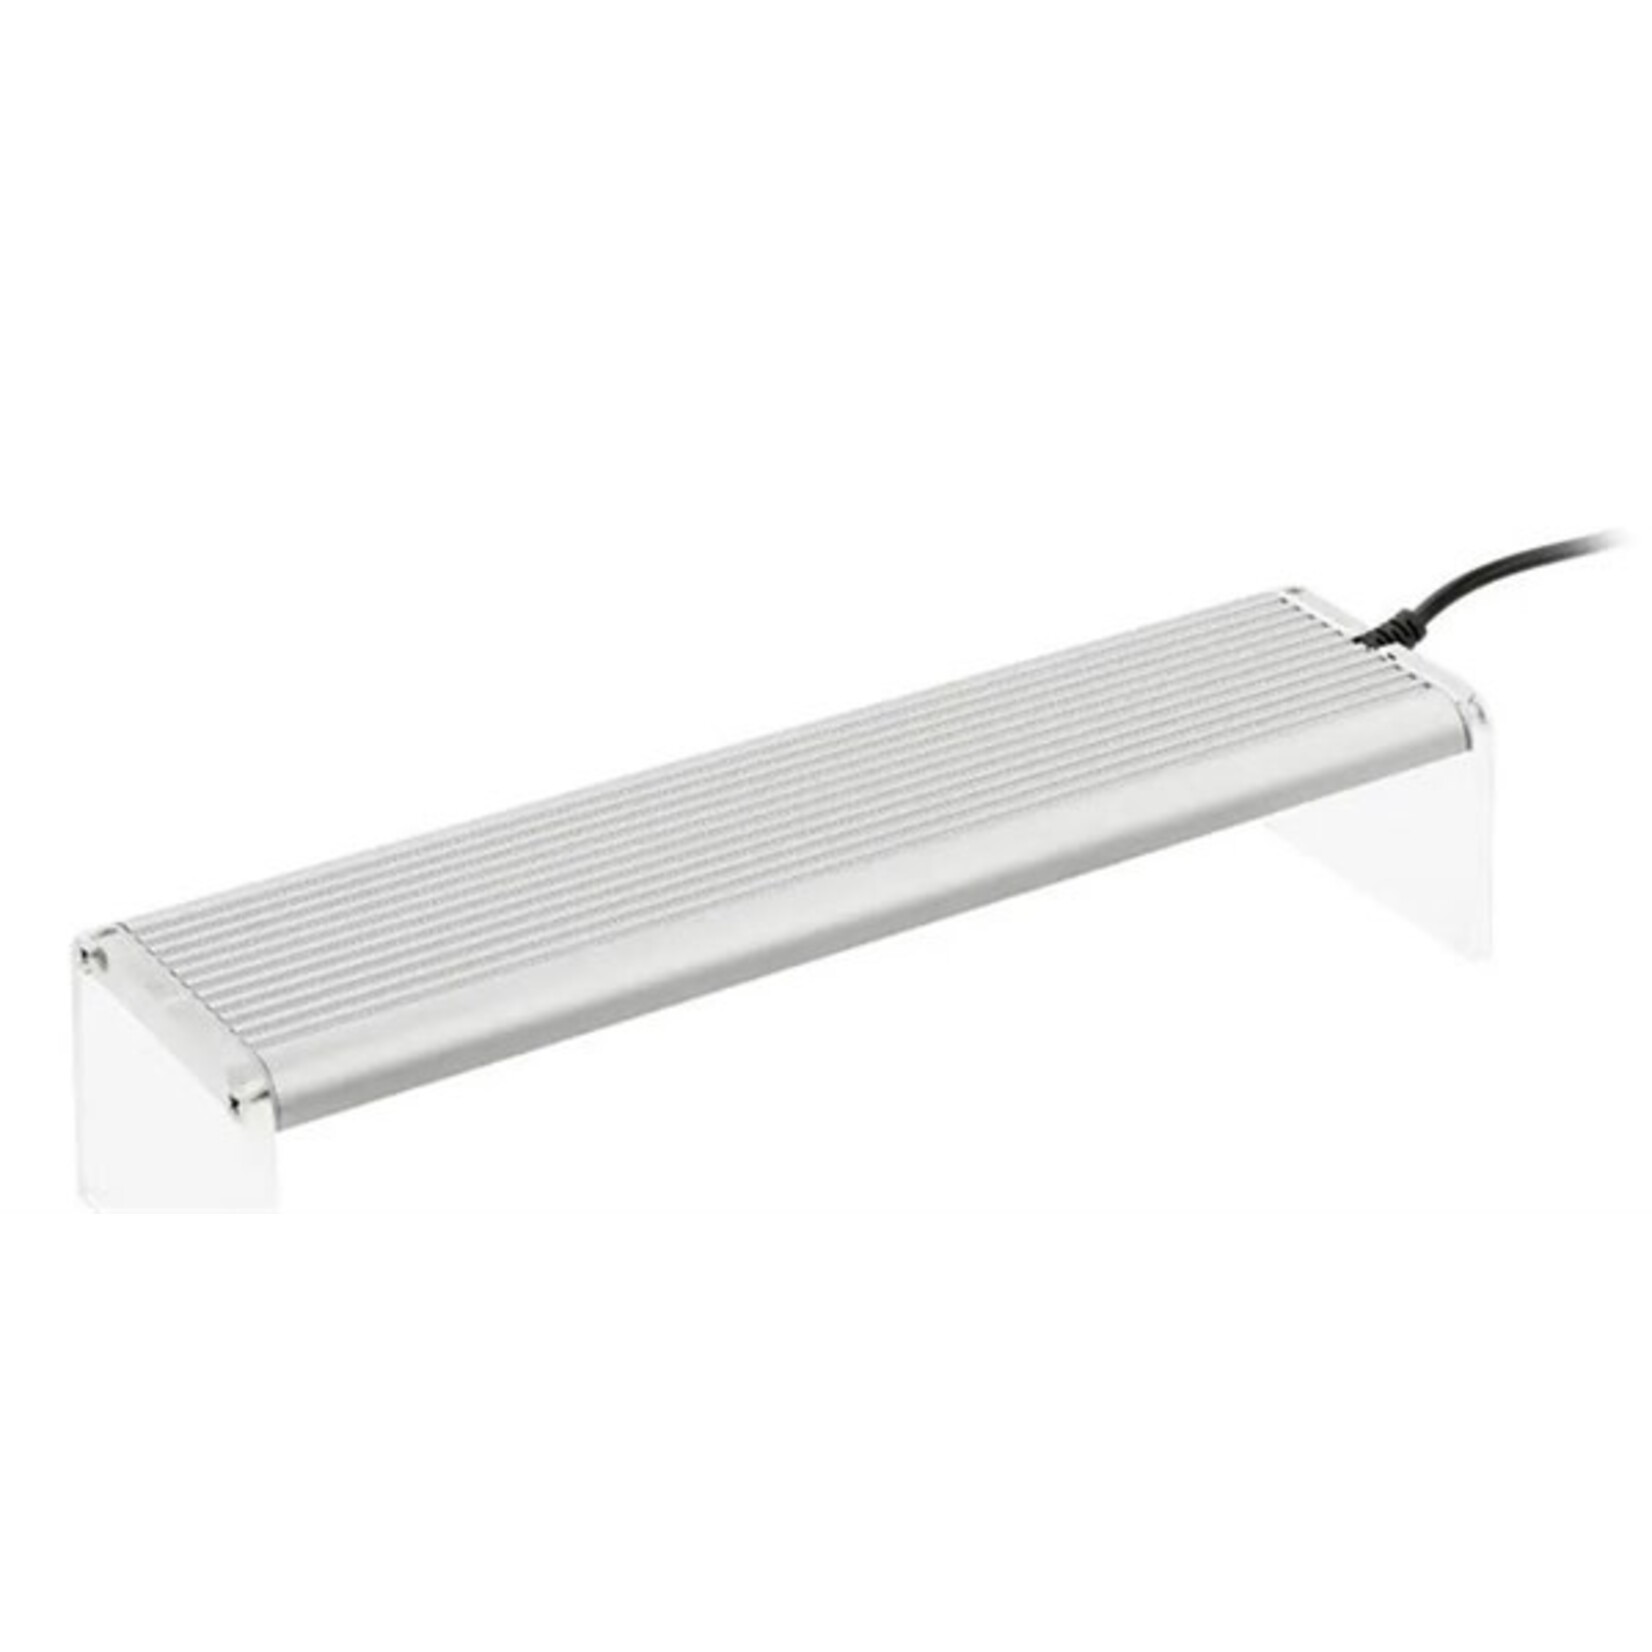 Chihiros A LED A601 60cm 39w - incl. Duitse trafo